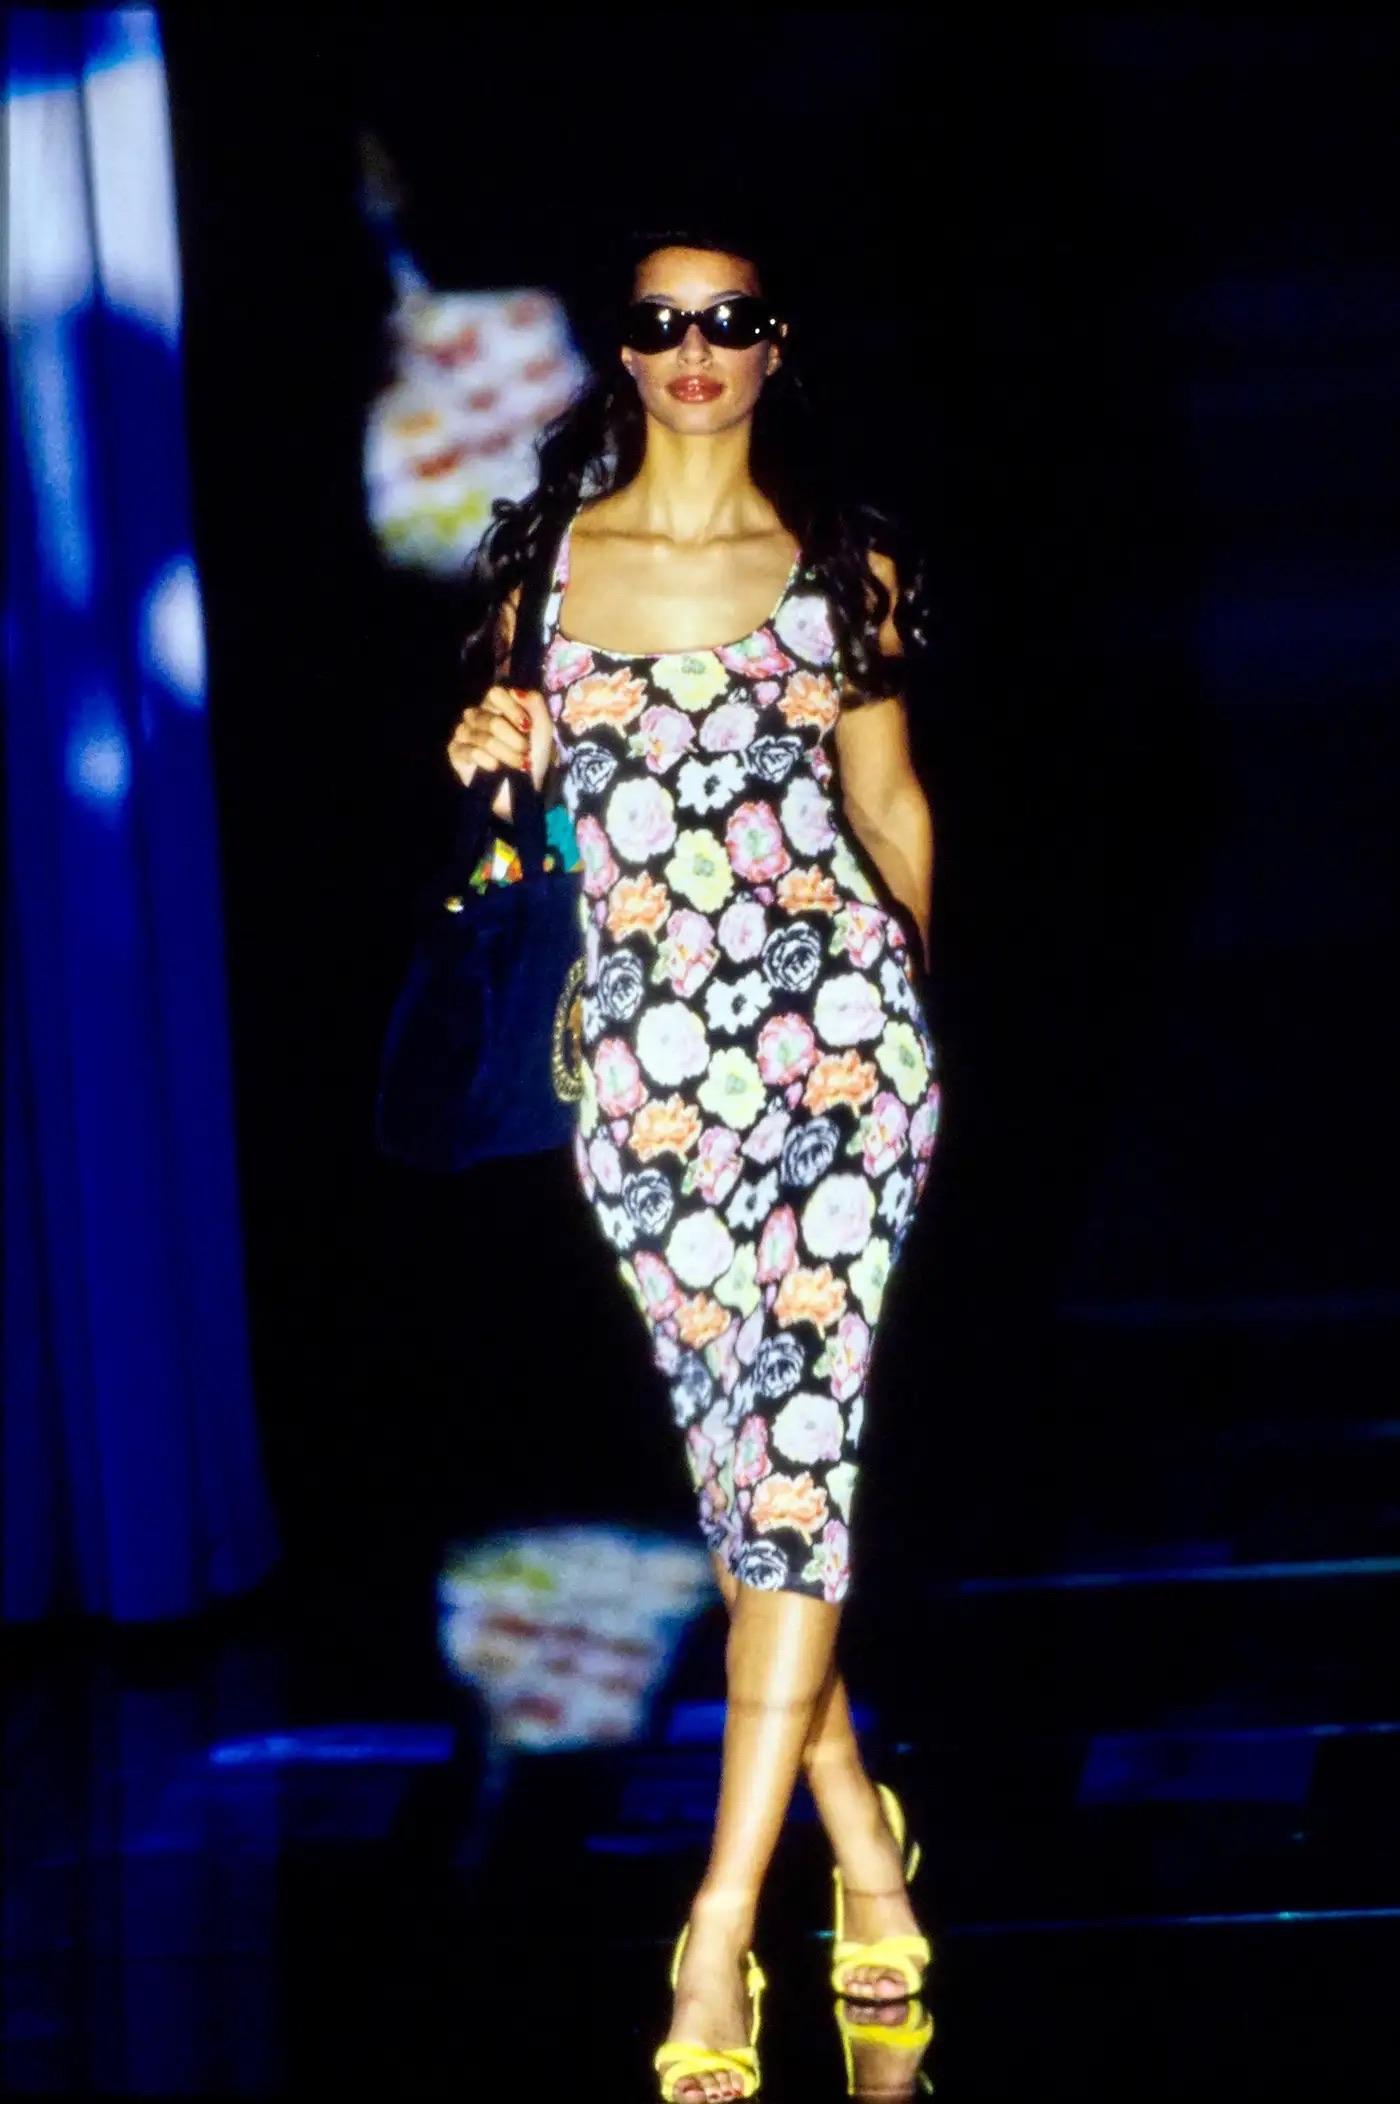 Presenting a floral-print semi-sheer Gianni Versace slip dress, designed by Gianni Versace. From the Spring/Summer 1995 collection, this piece debuted on the season's runway as look 11, modeled by Brandi Quinones. Gianni described this collection as